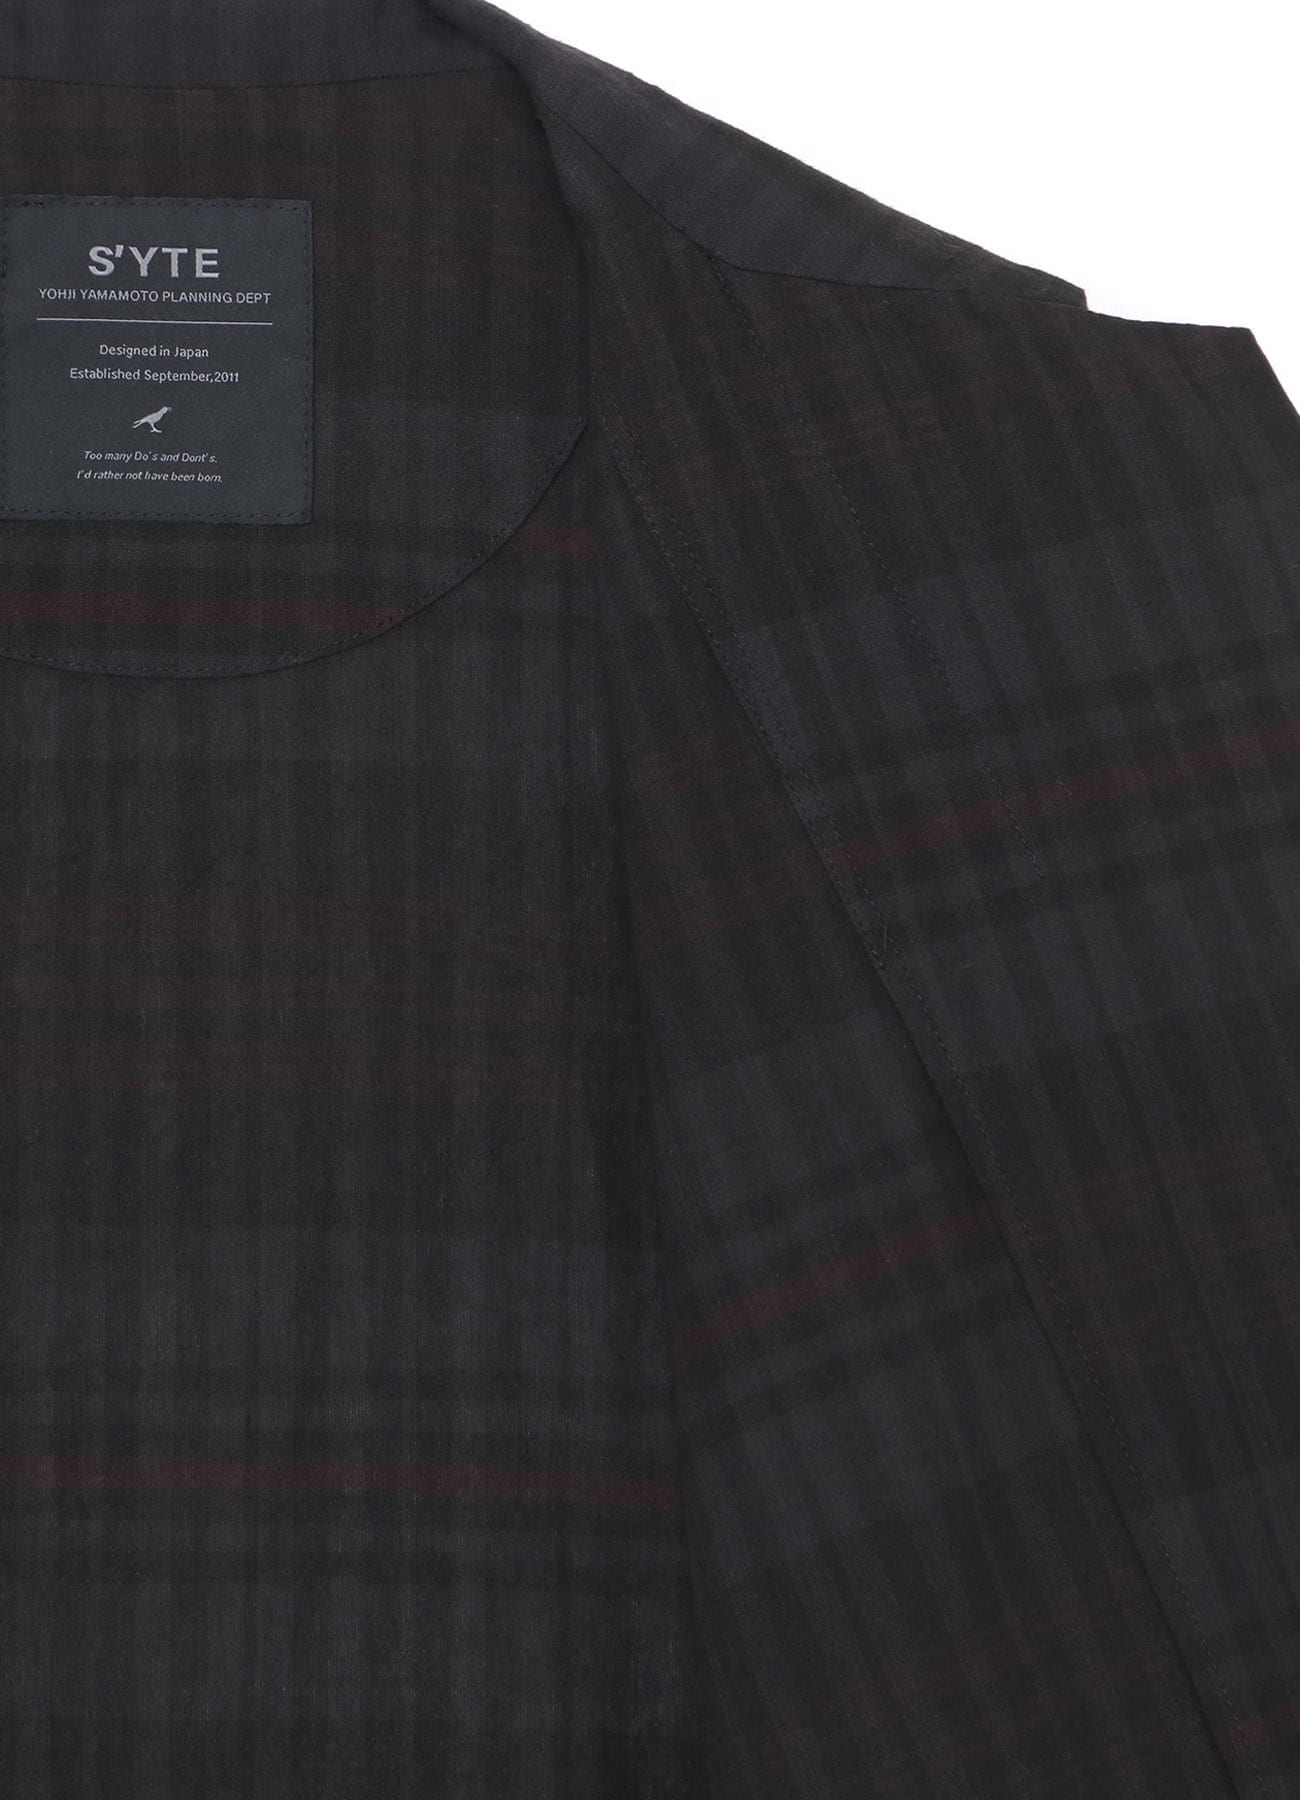 UNEVENLY DYED BLACK & WHITE MADRAS CHECK LONG JACKET(M Black x